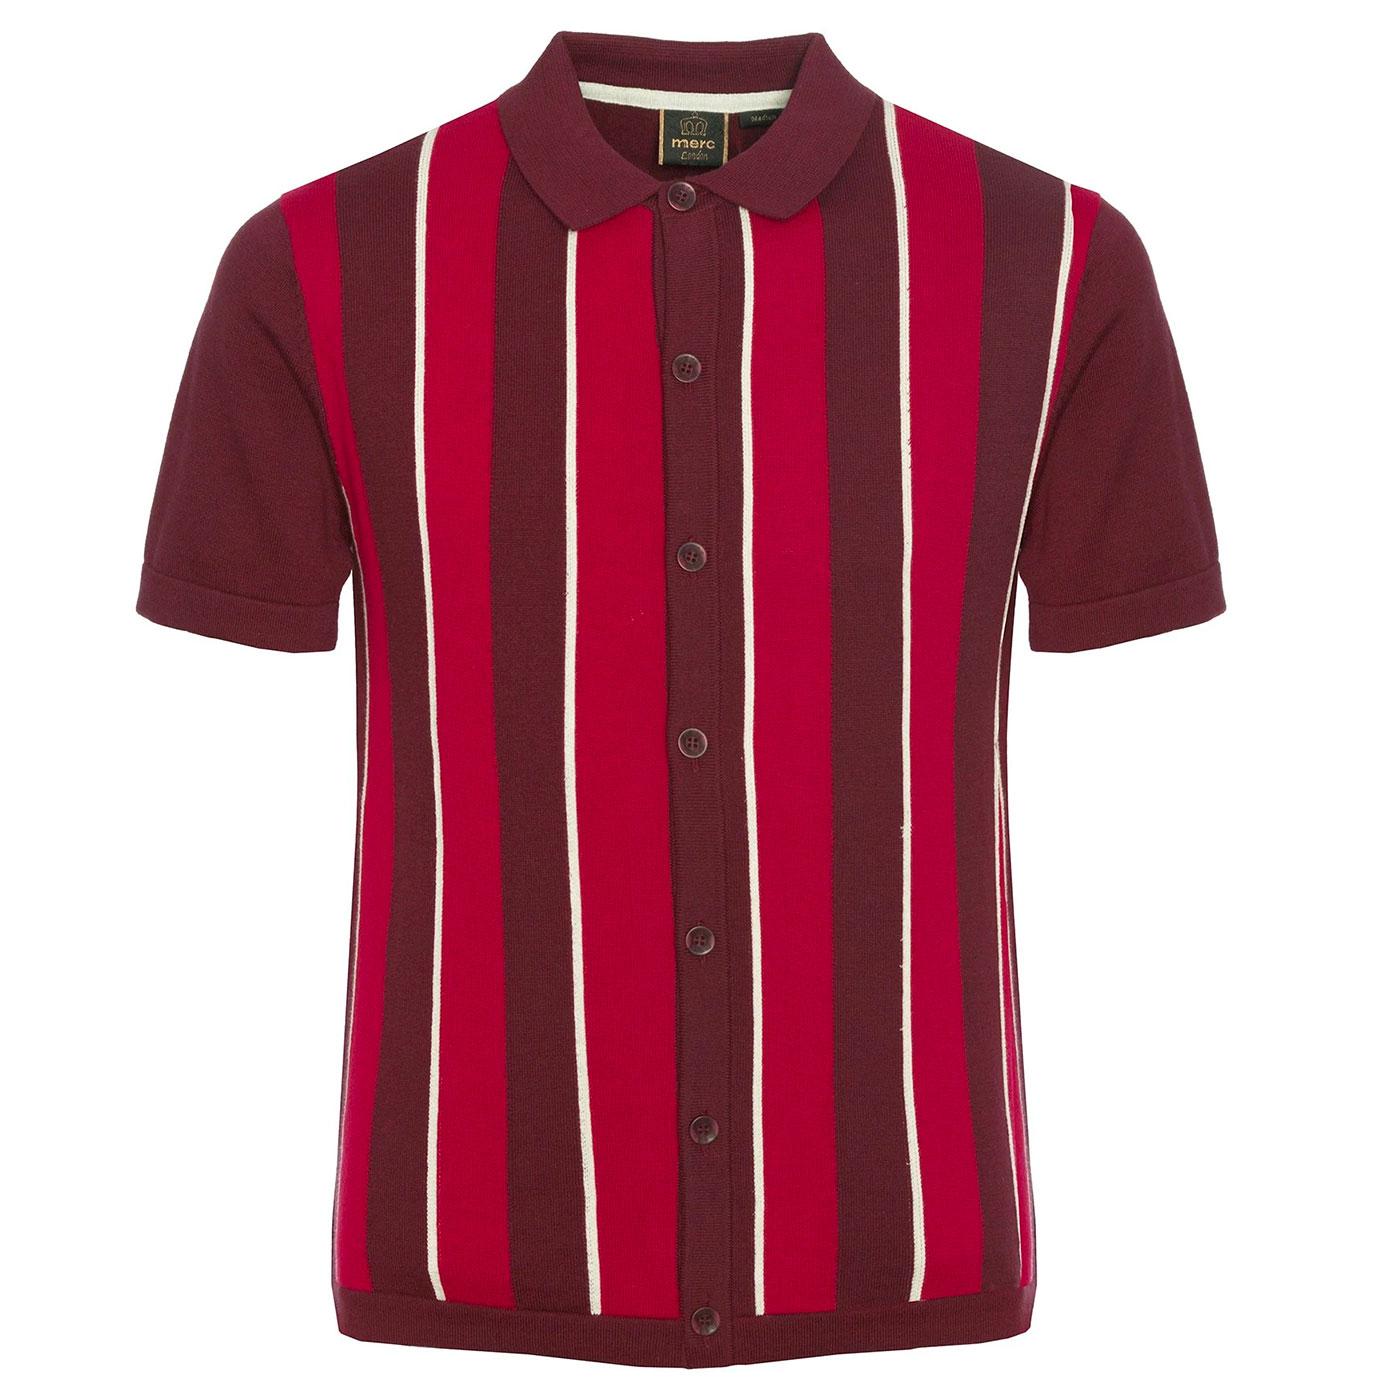 Ravendale MERC Retro 50s Striped Knitted Shirt in Mahogany